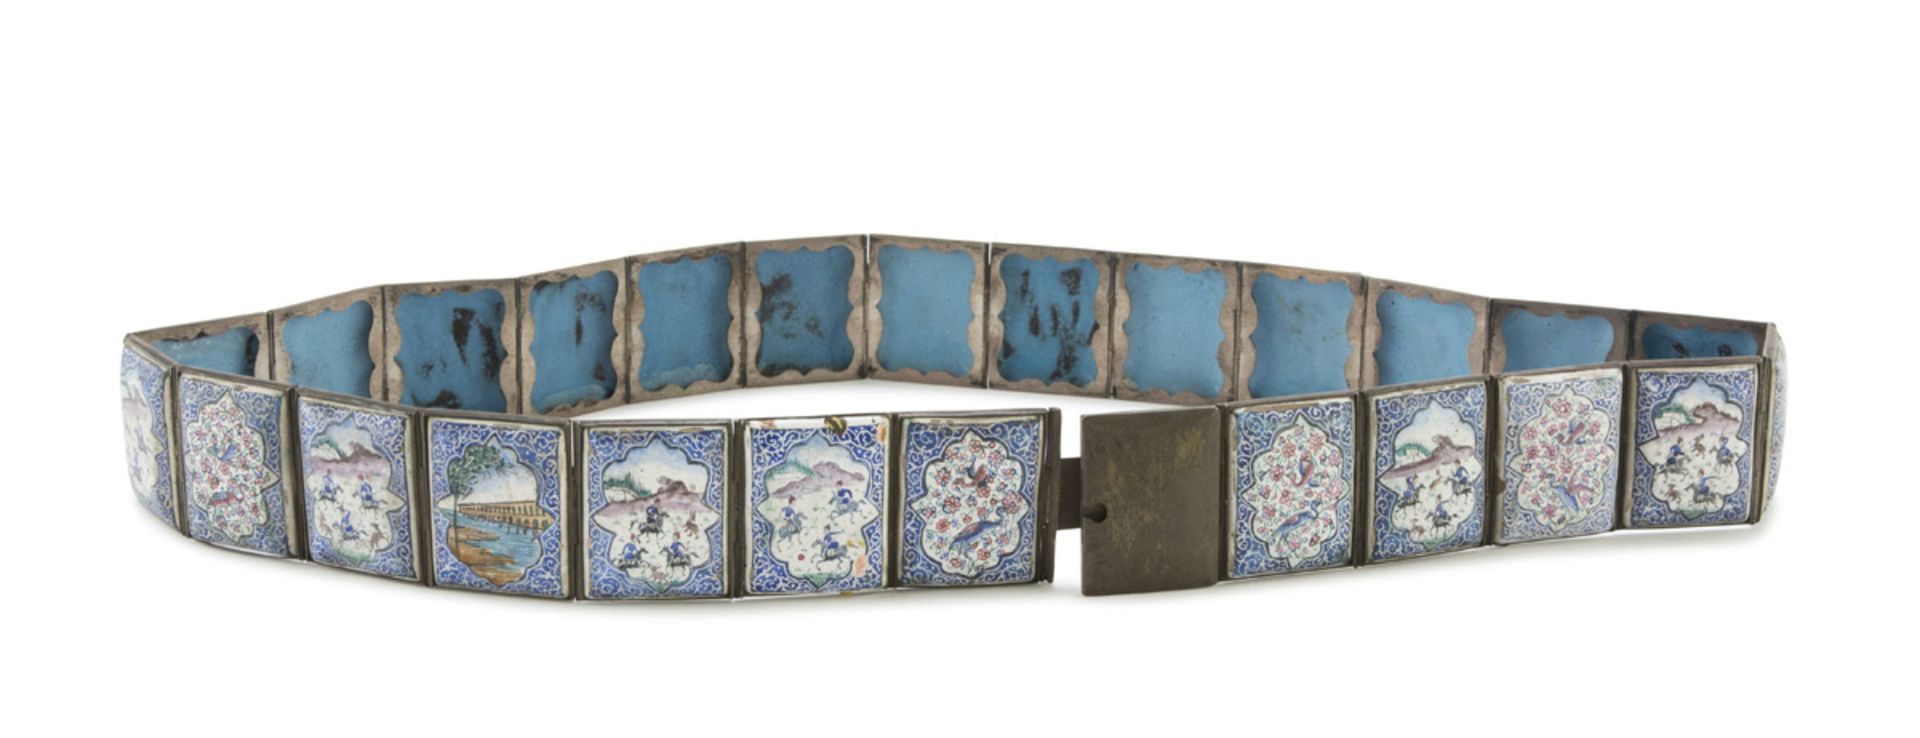 METAL BELT IN POLYCHROME ENAMELS, PERSIA, EARLY 20TH CENTURY consisting of twenty-five small